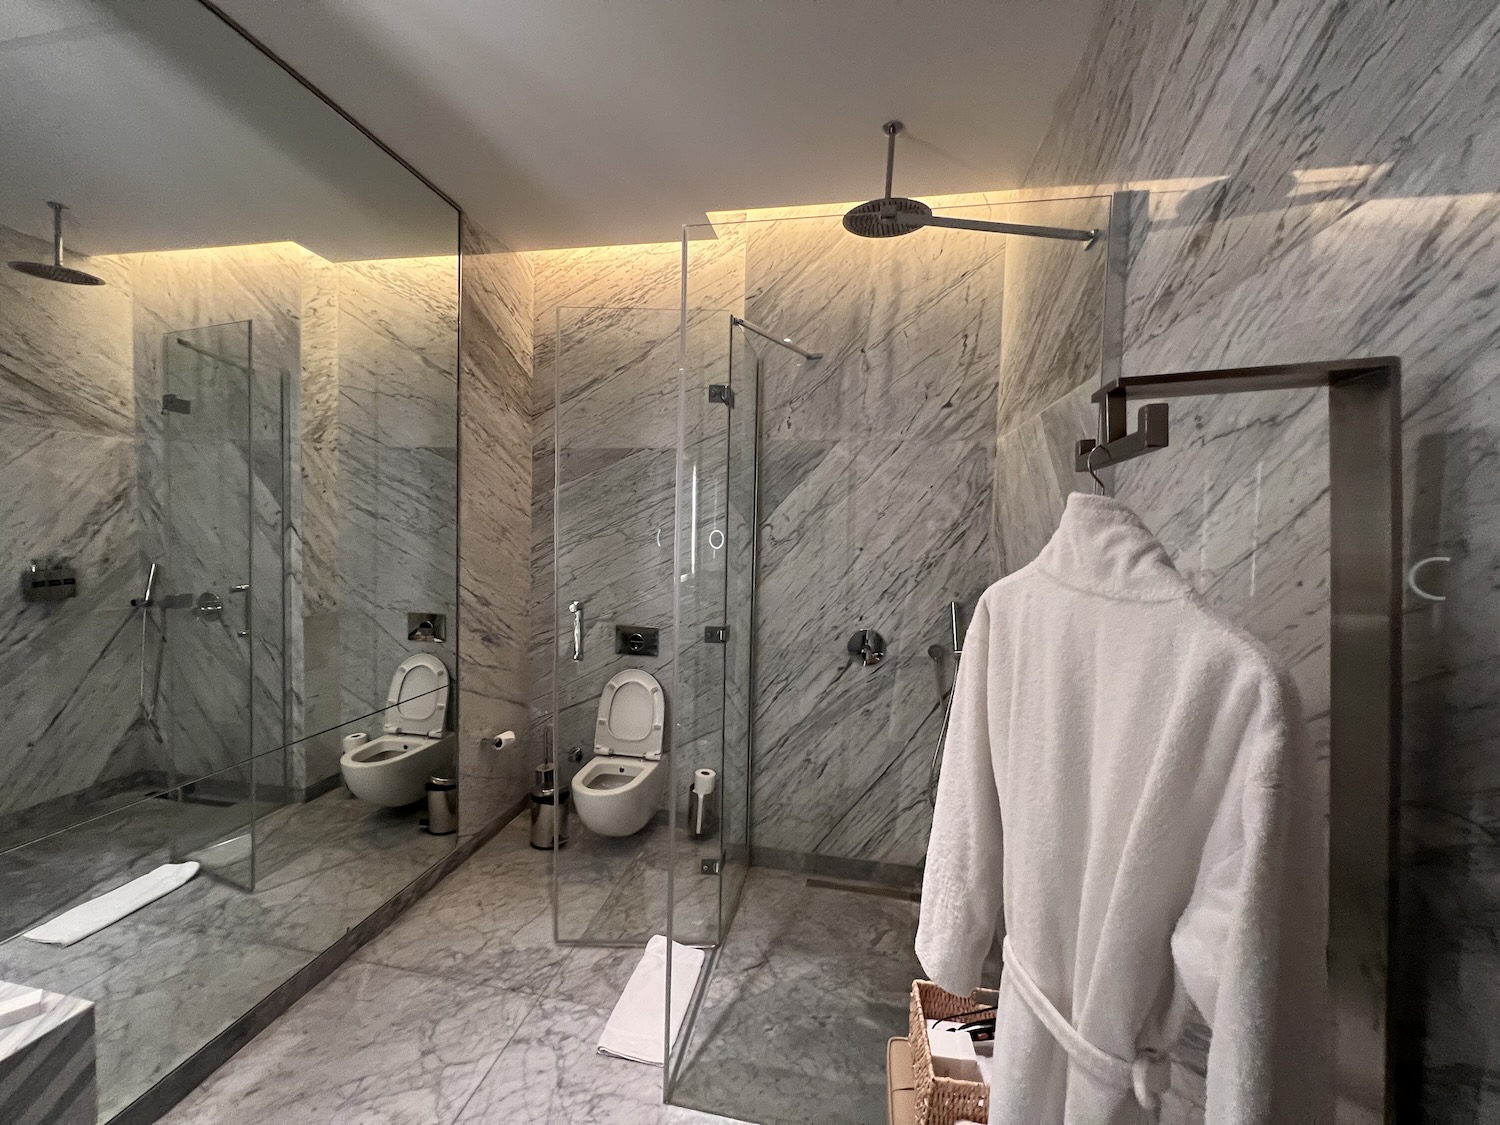 Turkish Airlines Business Class Lounge Bathroom and Shower